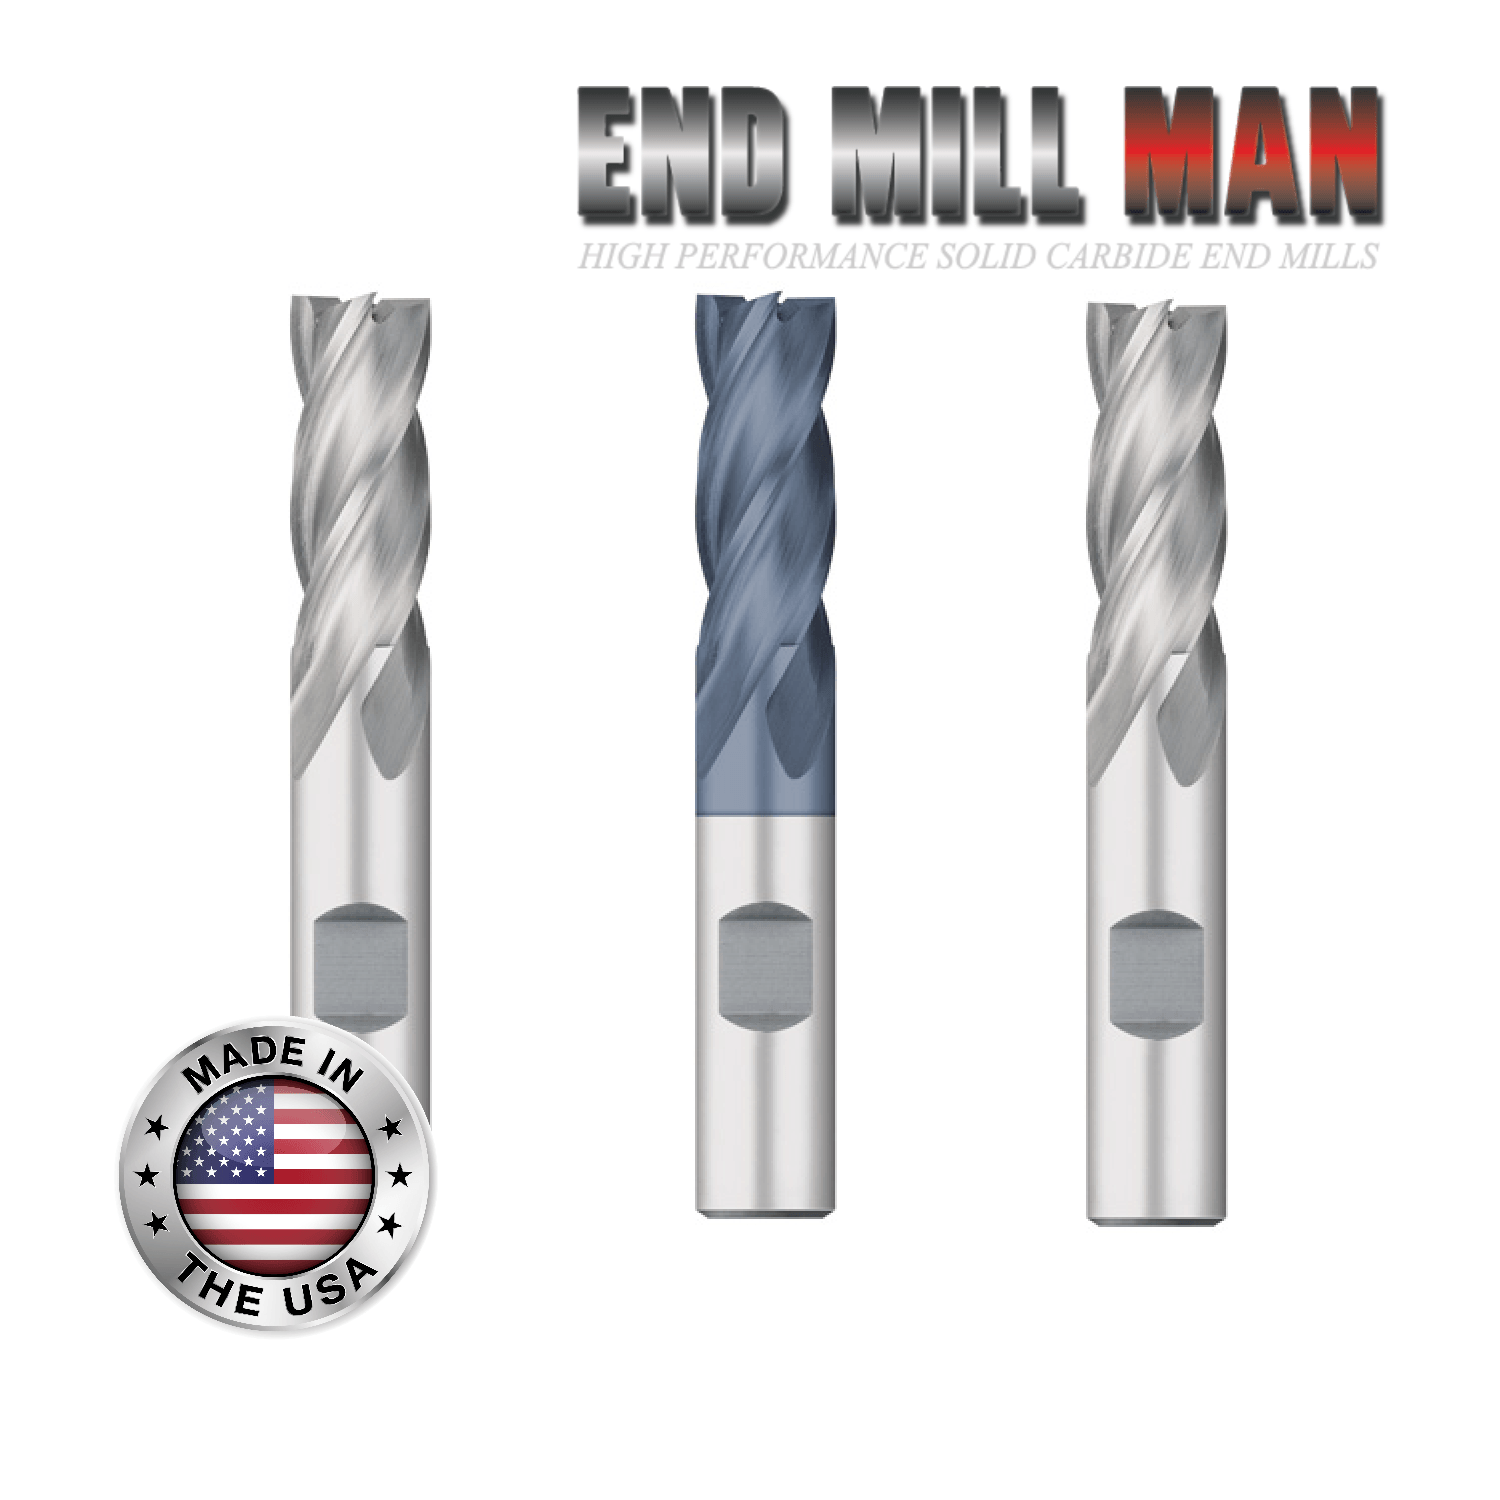 15/16" x 1-7/8" LOC (3 Pack) HSS 4 Flute End Mills (7/8" Shanks) - The End Mill Store 